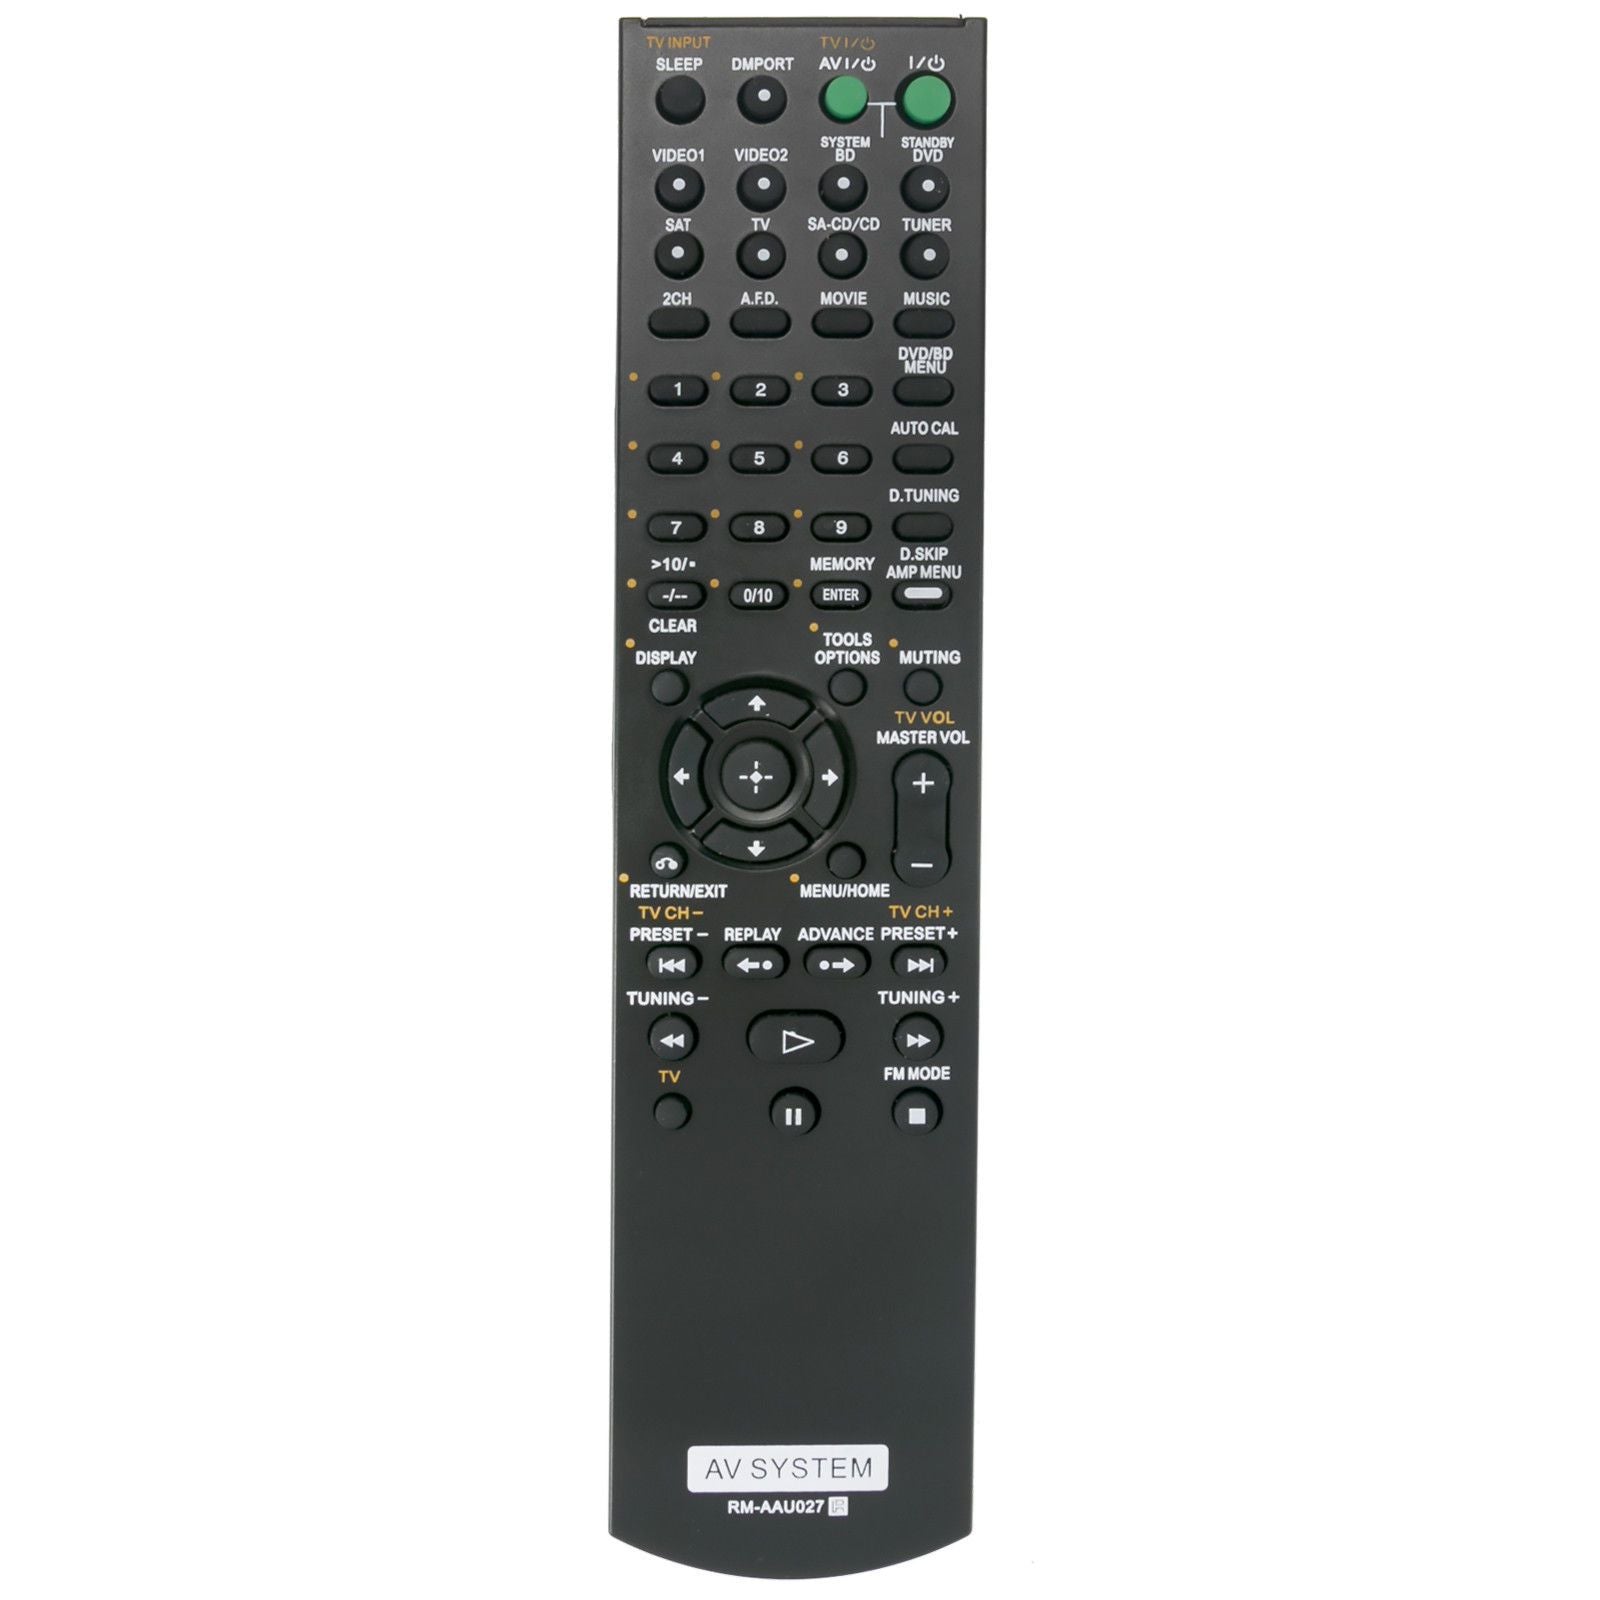 RM-AAU027 Replacement Remote Control for Sony Receiver STR-KM5000 HT-DDW5500 STR-KM5500